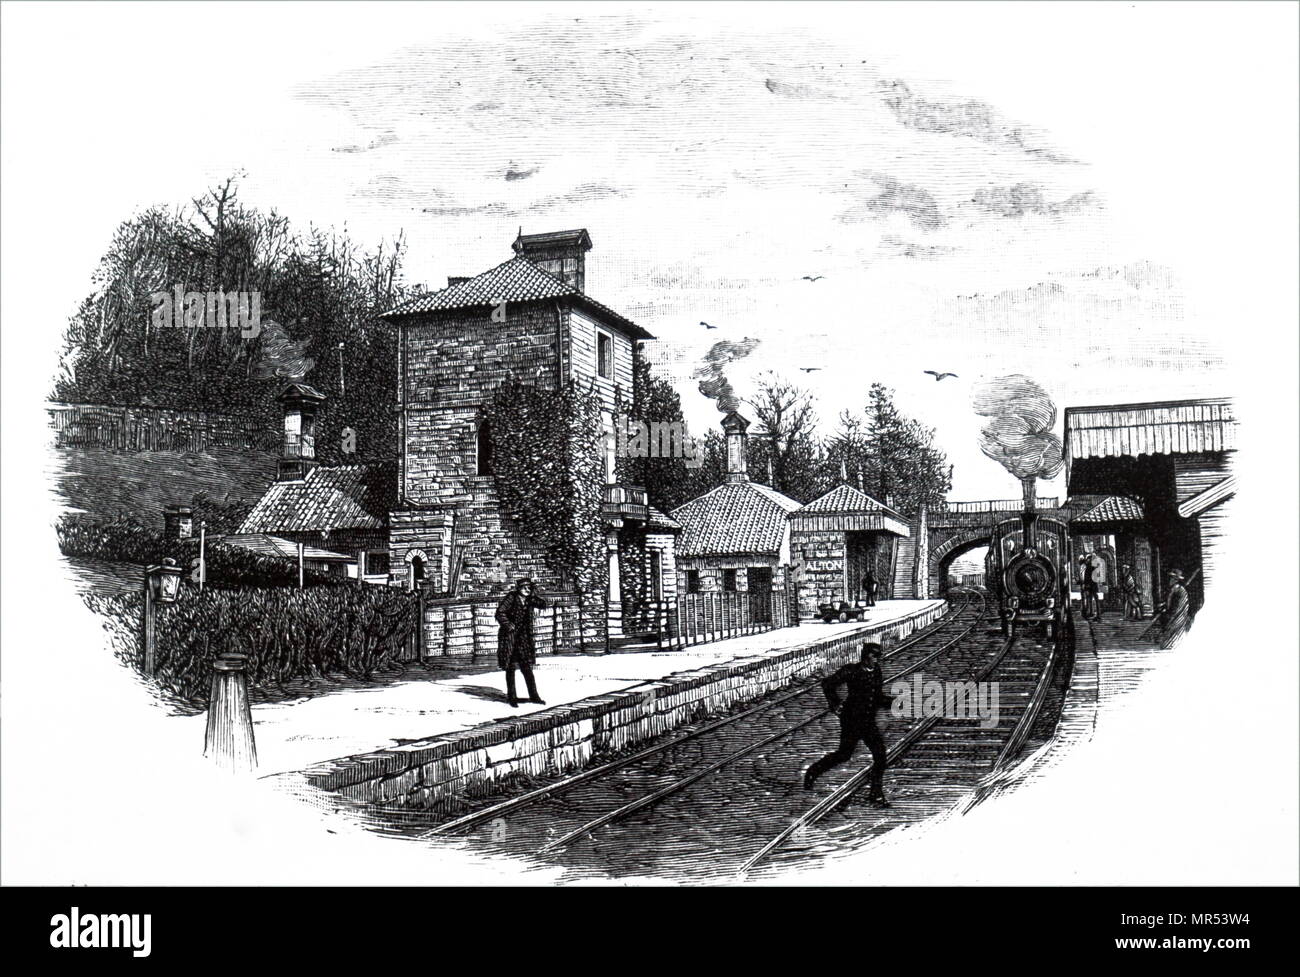 Engraving depicting a view of North Staffordshire railway station, located at Alton Towers. Dated 19th century Stock Photo